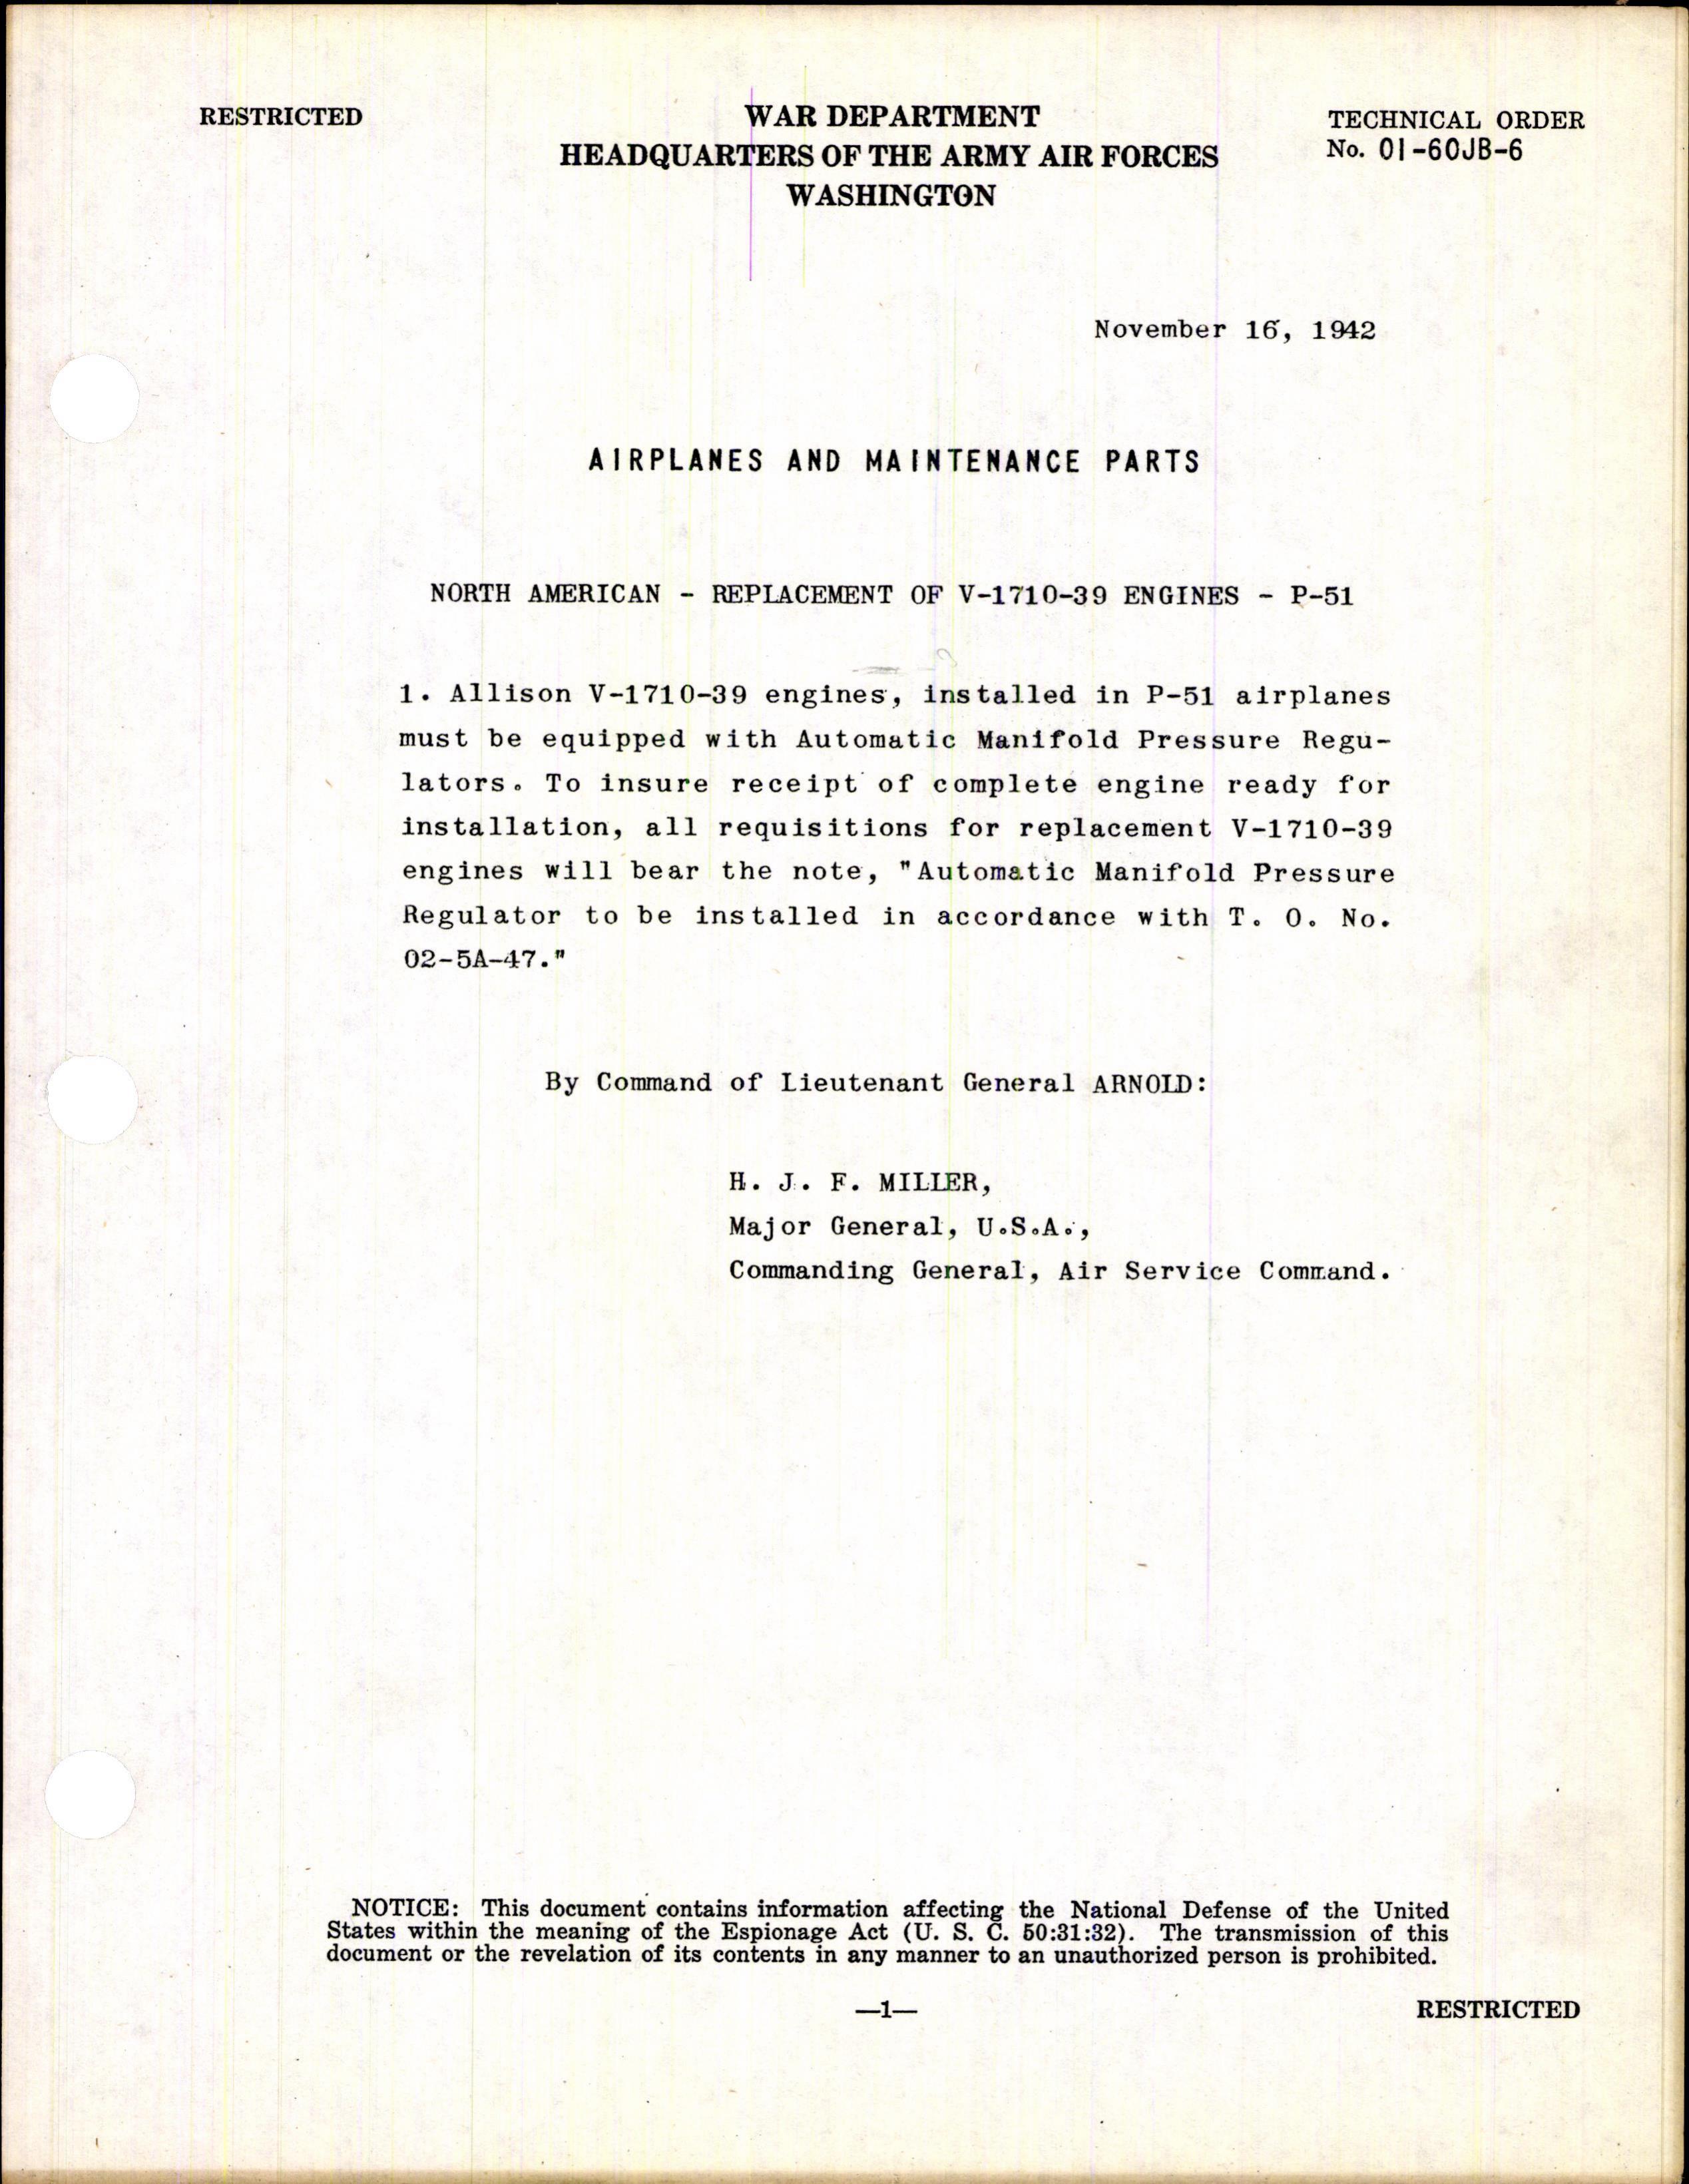 Sample page 1 from AirCorps Library document: Airplane and Maintenance Parts, Replacement Engine for P-51